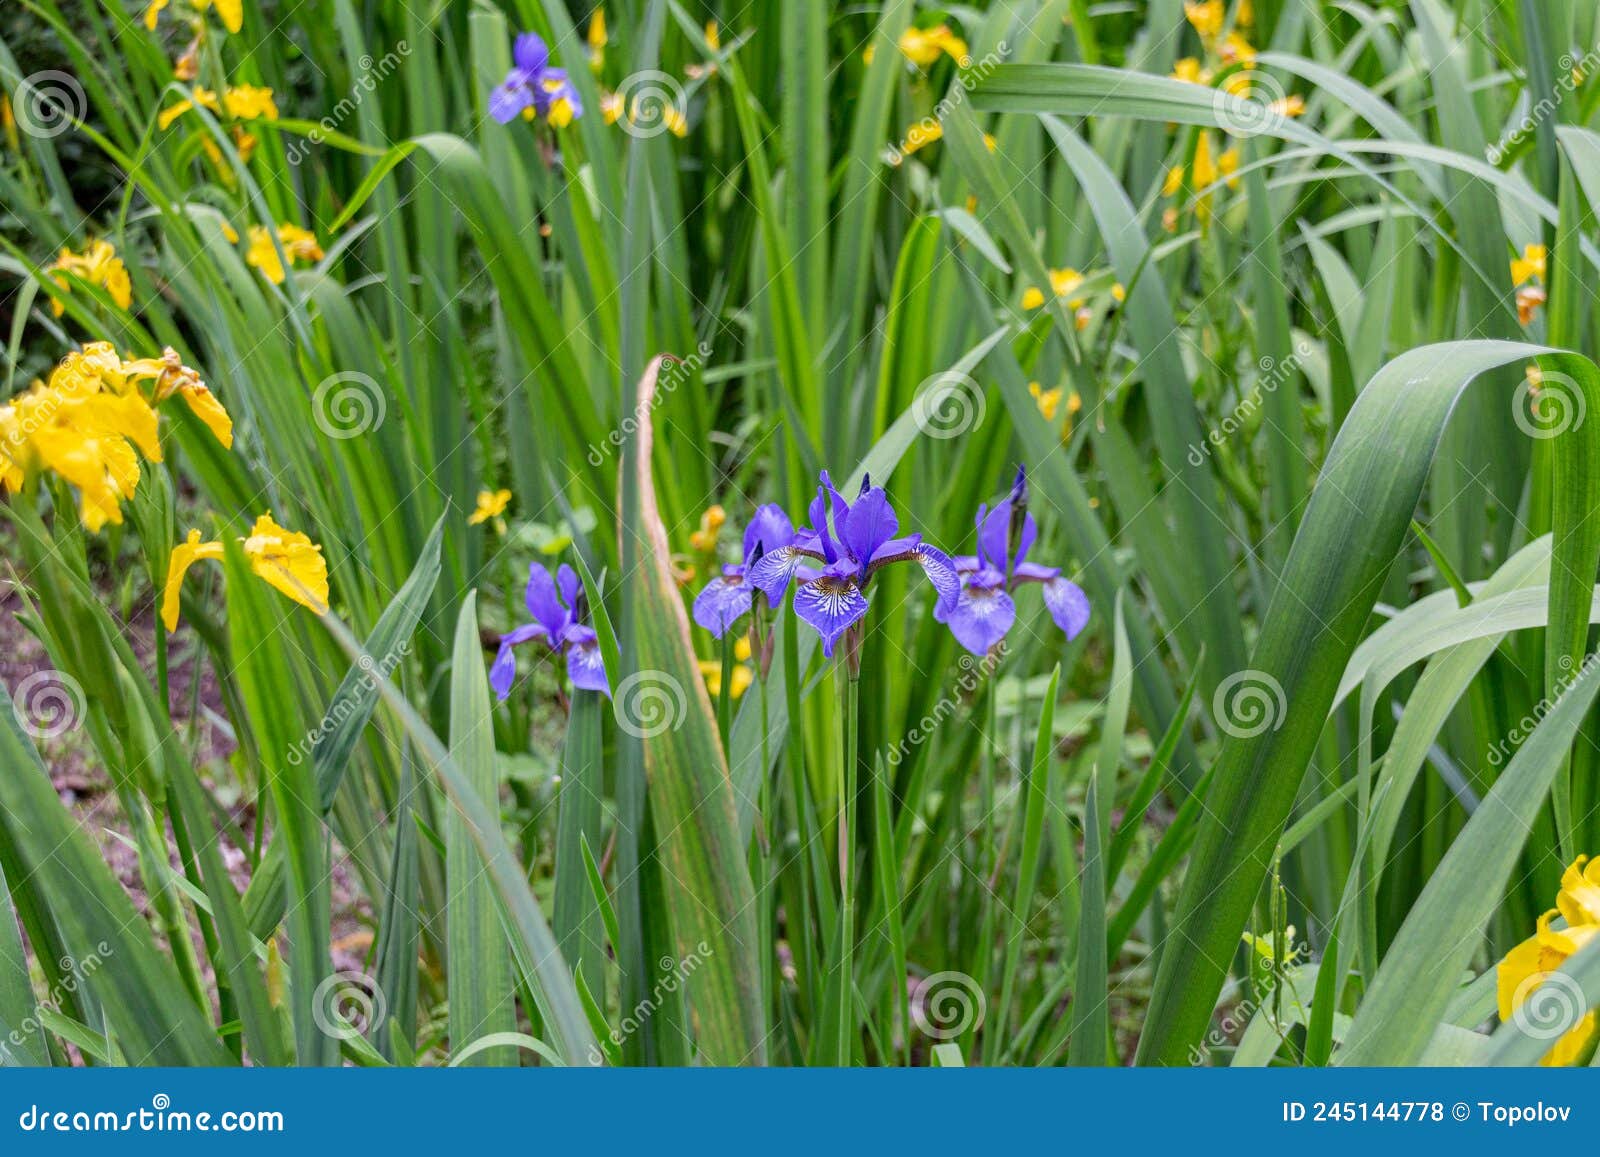 Blooming Yellow and Blue Iris Flowers Stock Photo - Image of summer ...